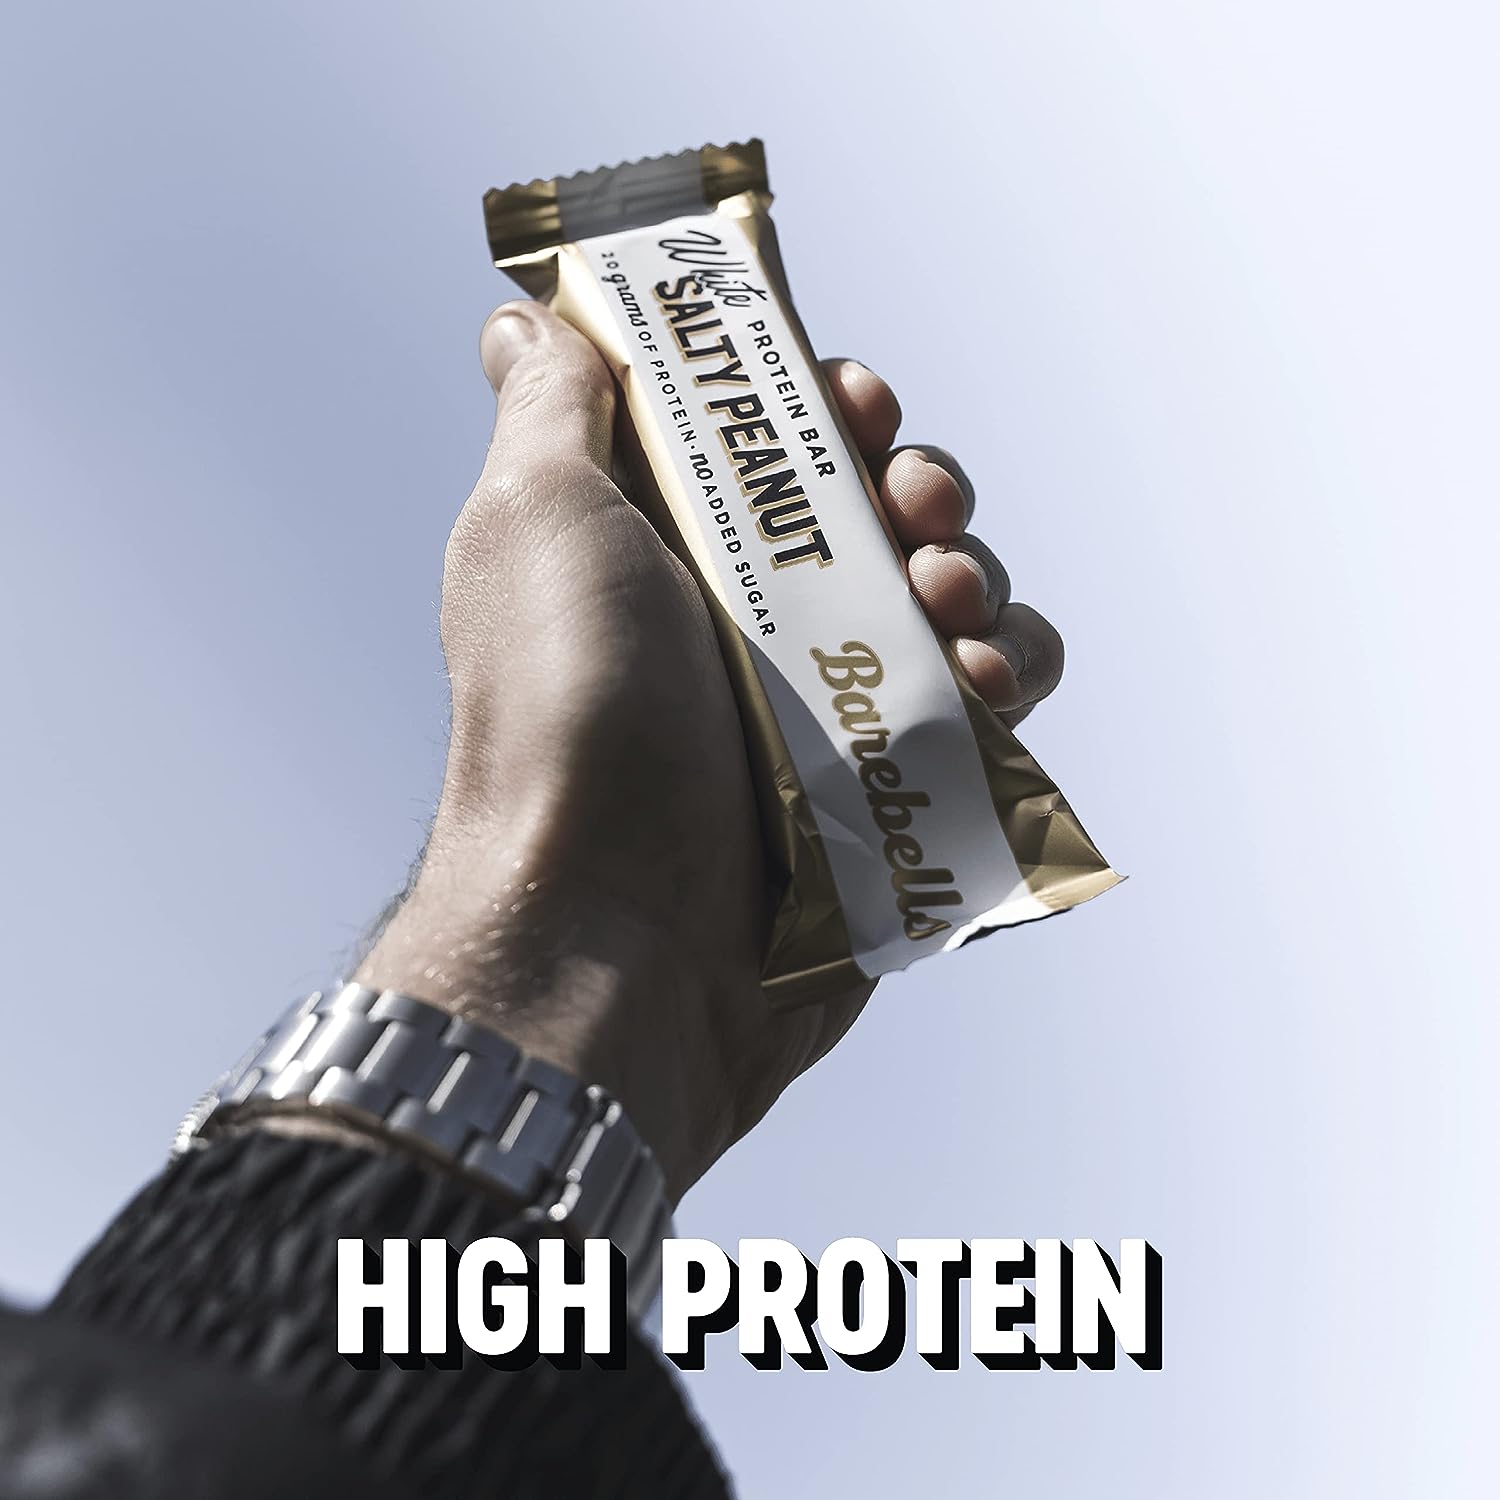 Barebells White Salty Peanut High Protein and Low Carb Bar